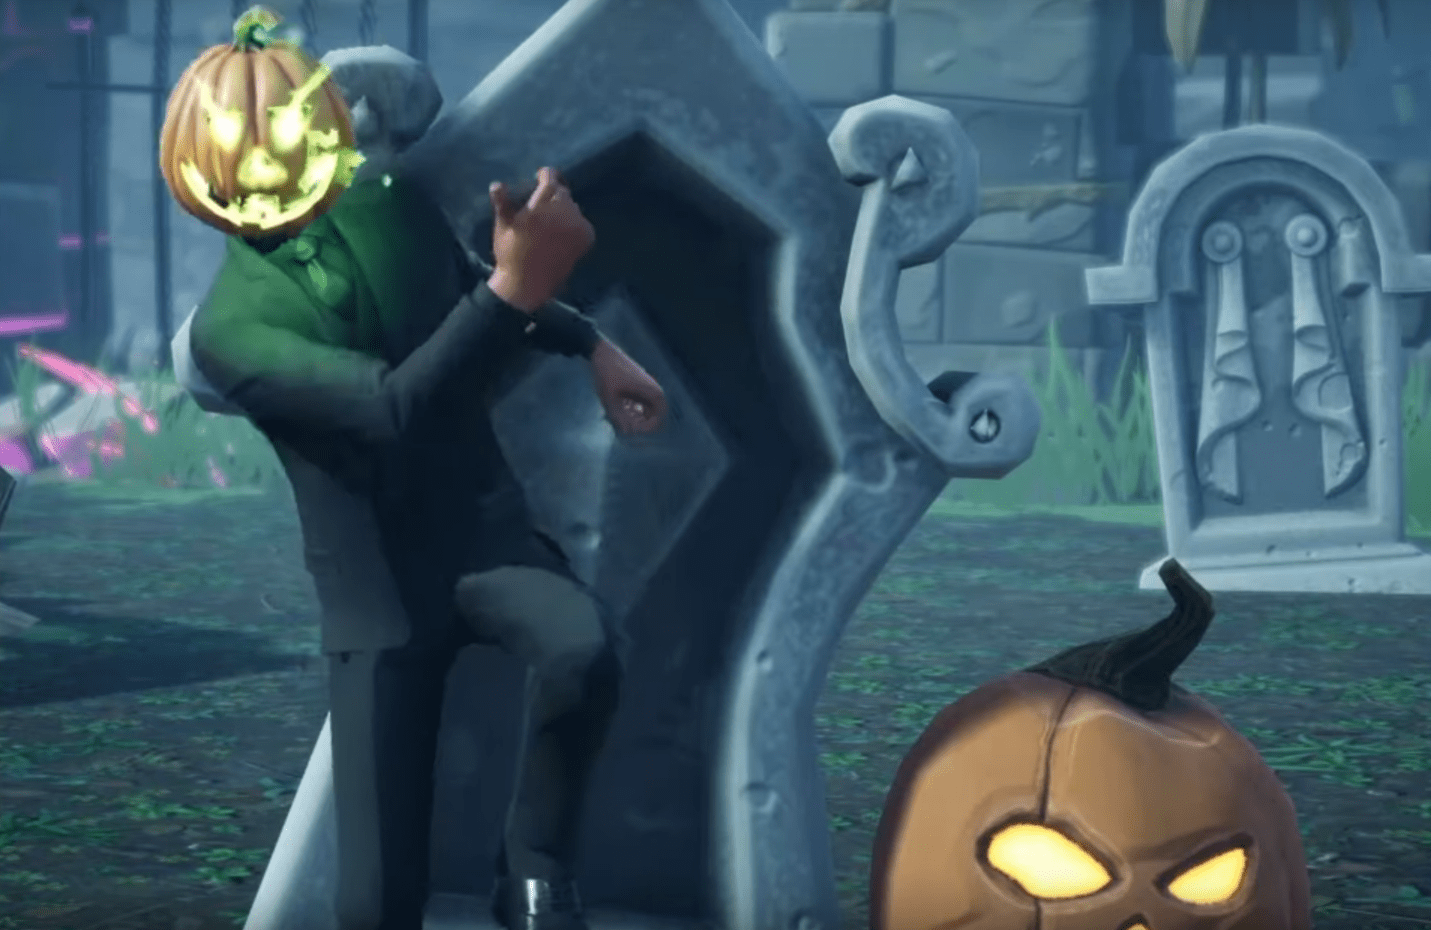 Epic Games Has Filed A Complaint Against ‘The Pumpkin Man’ After He Alleged That The Fortnite Developer Stole His Likeness